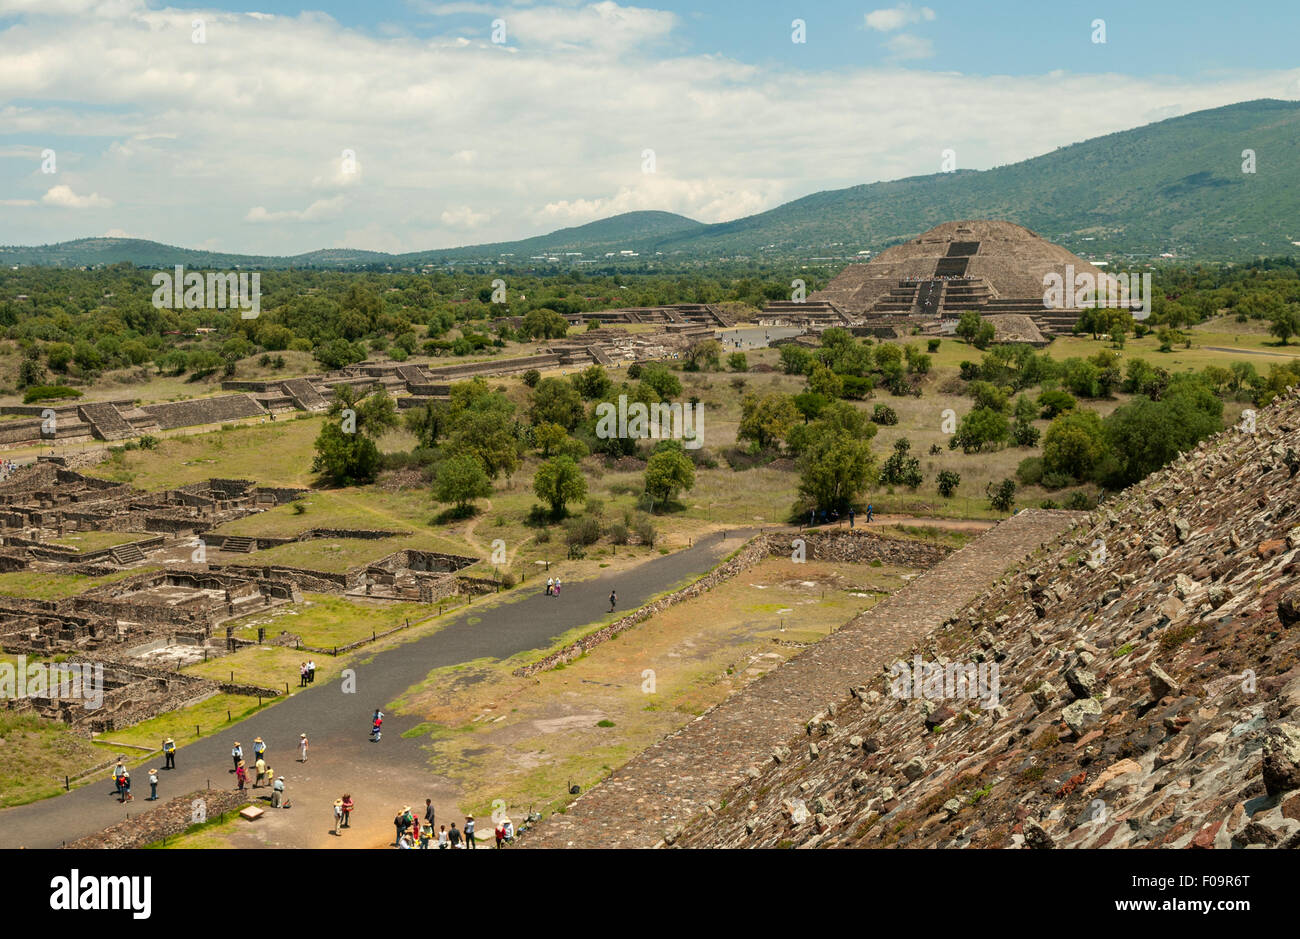 Pyramid of the Moon, Teotihuacan, Mexico Stock Photo - Alamy